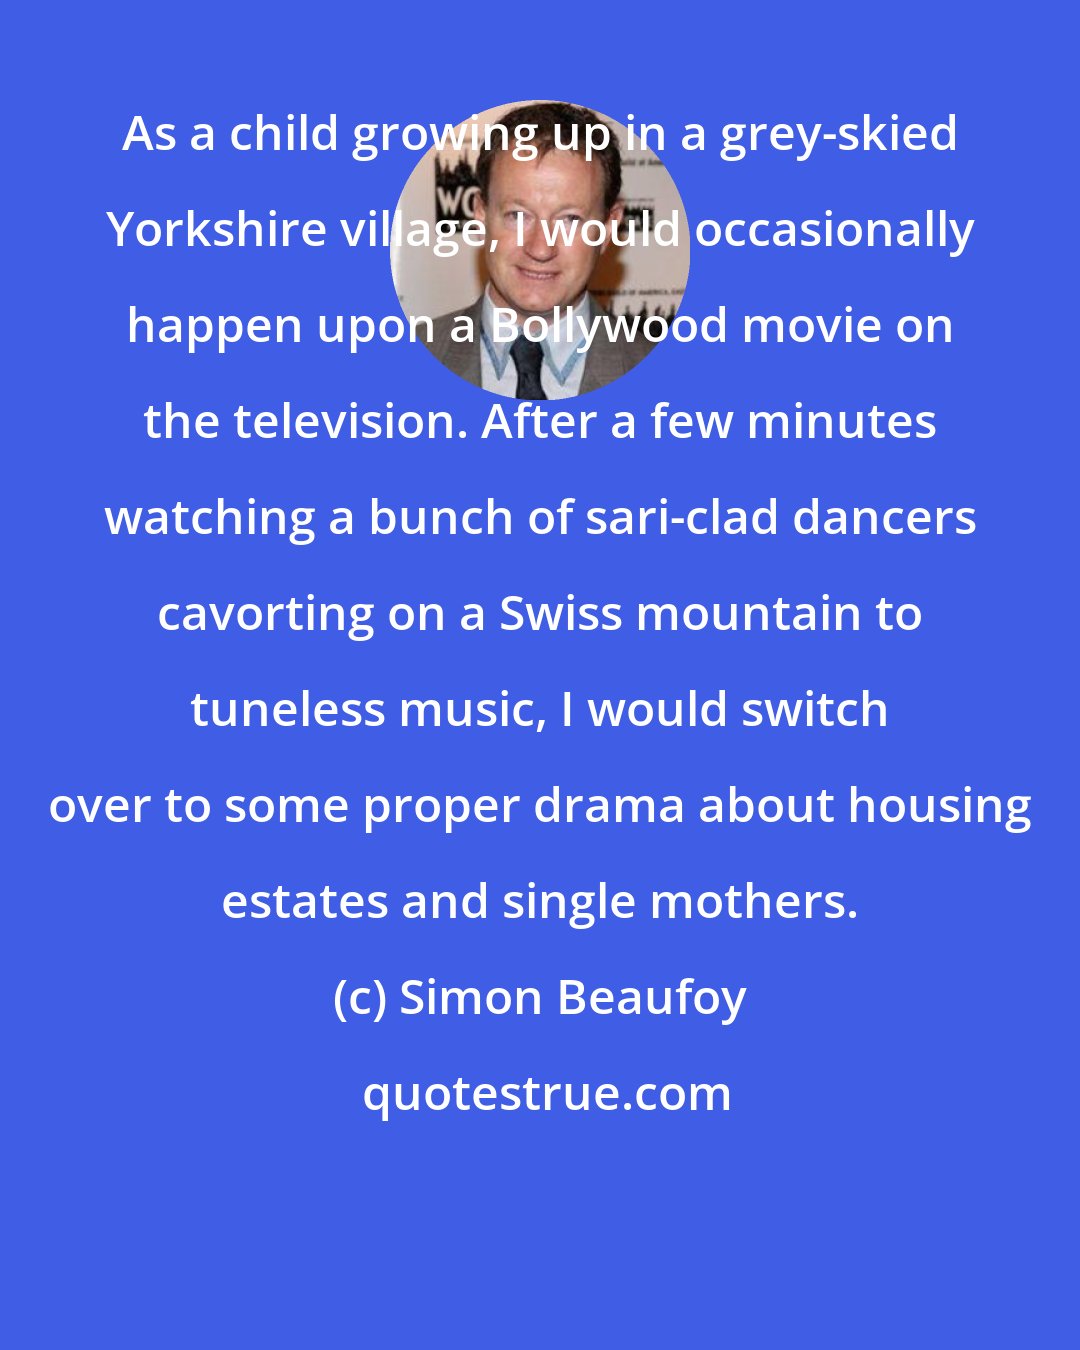 Simon Beaufoy: As a child growing up in a grey-skied Yorkshire village, I would occasionally happen upon a Bollywood movie on the television. After a few minutes watching a bunch of sari-clad dancers cavorting on a Swiss mountain to tuneless music, I would switch over to some proper drama about housing estates and single mothers.